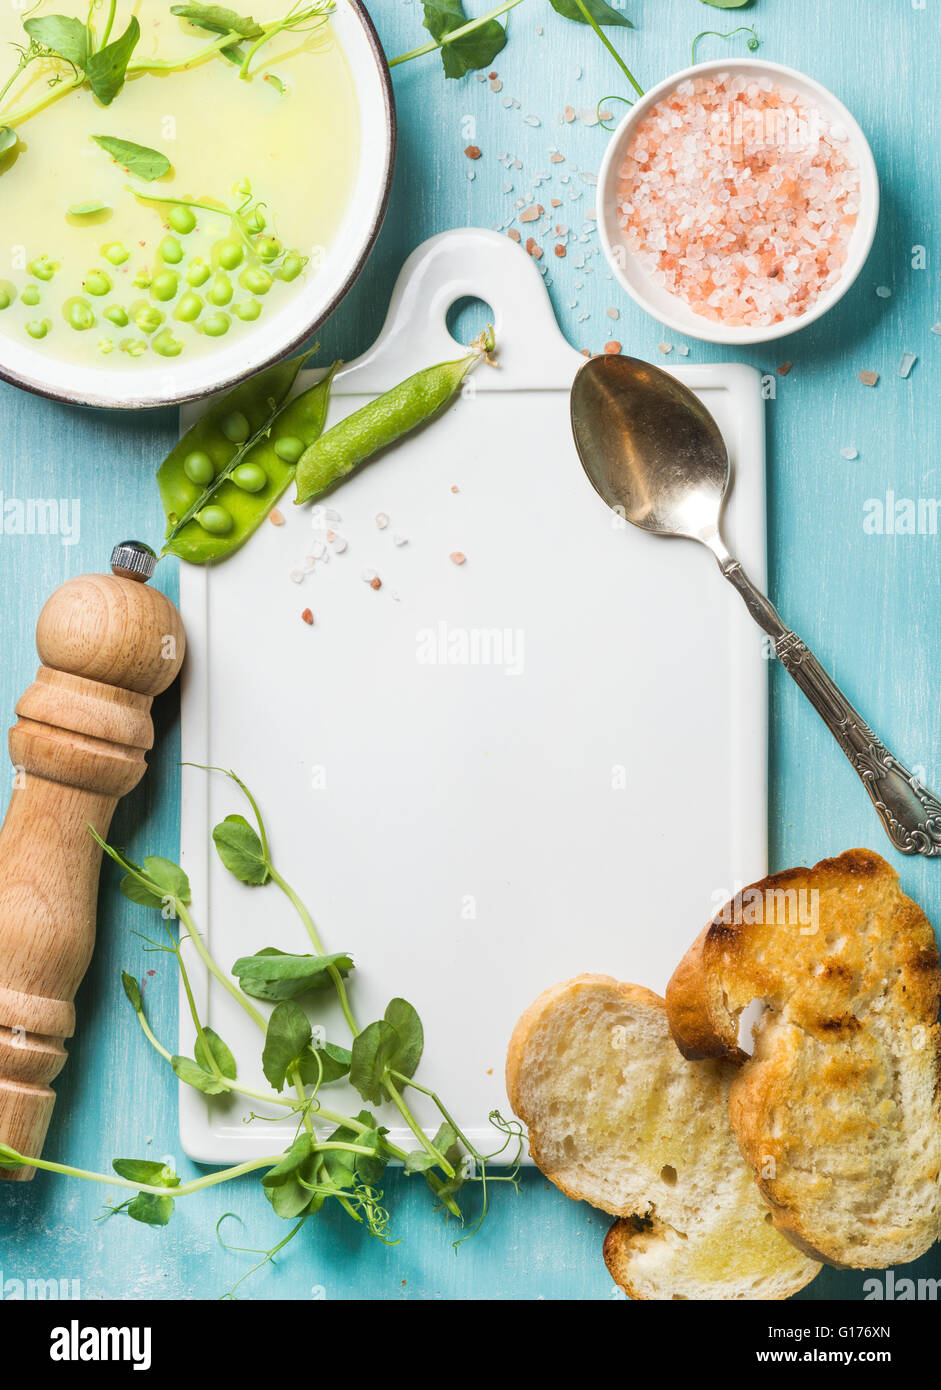 Light summer green pea cream soup in bowl with sprouts, bread toasts and spices. White ceramic board in the center, turquoise bl Stock Photo